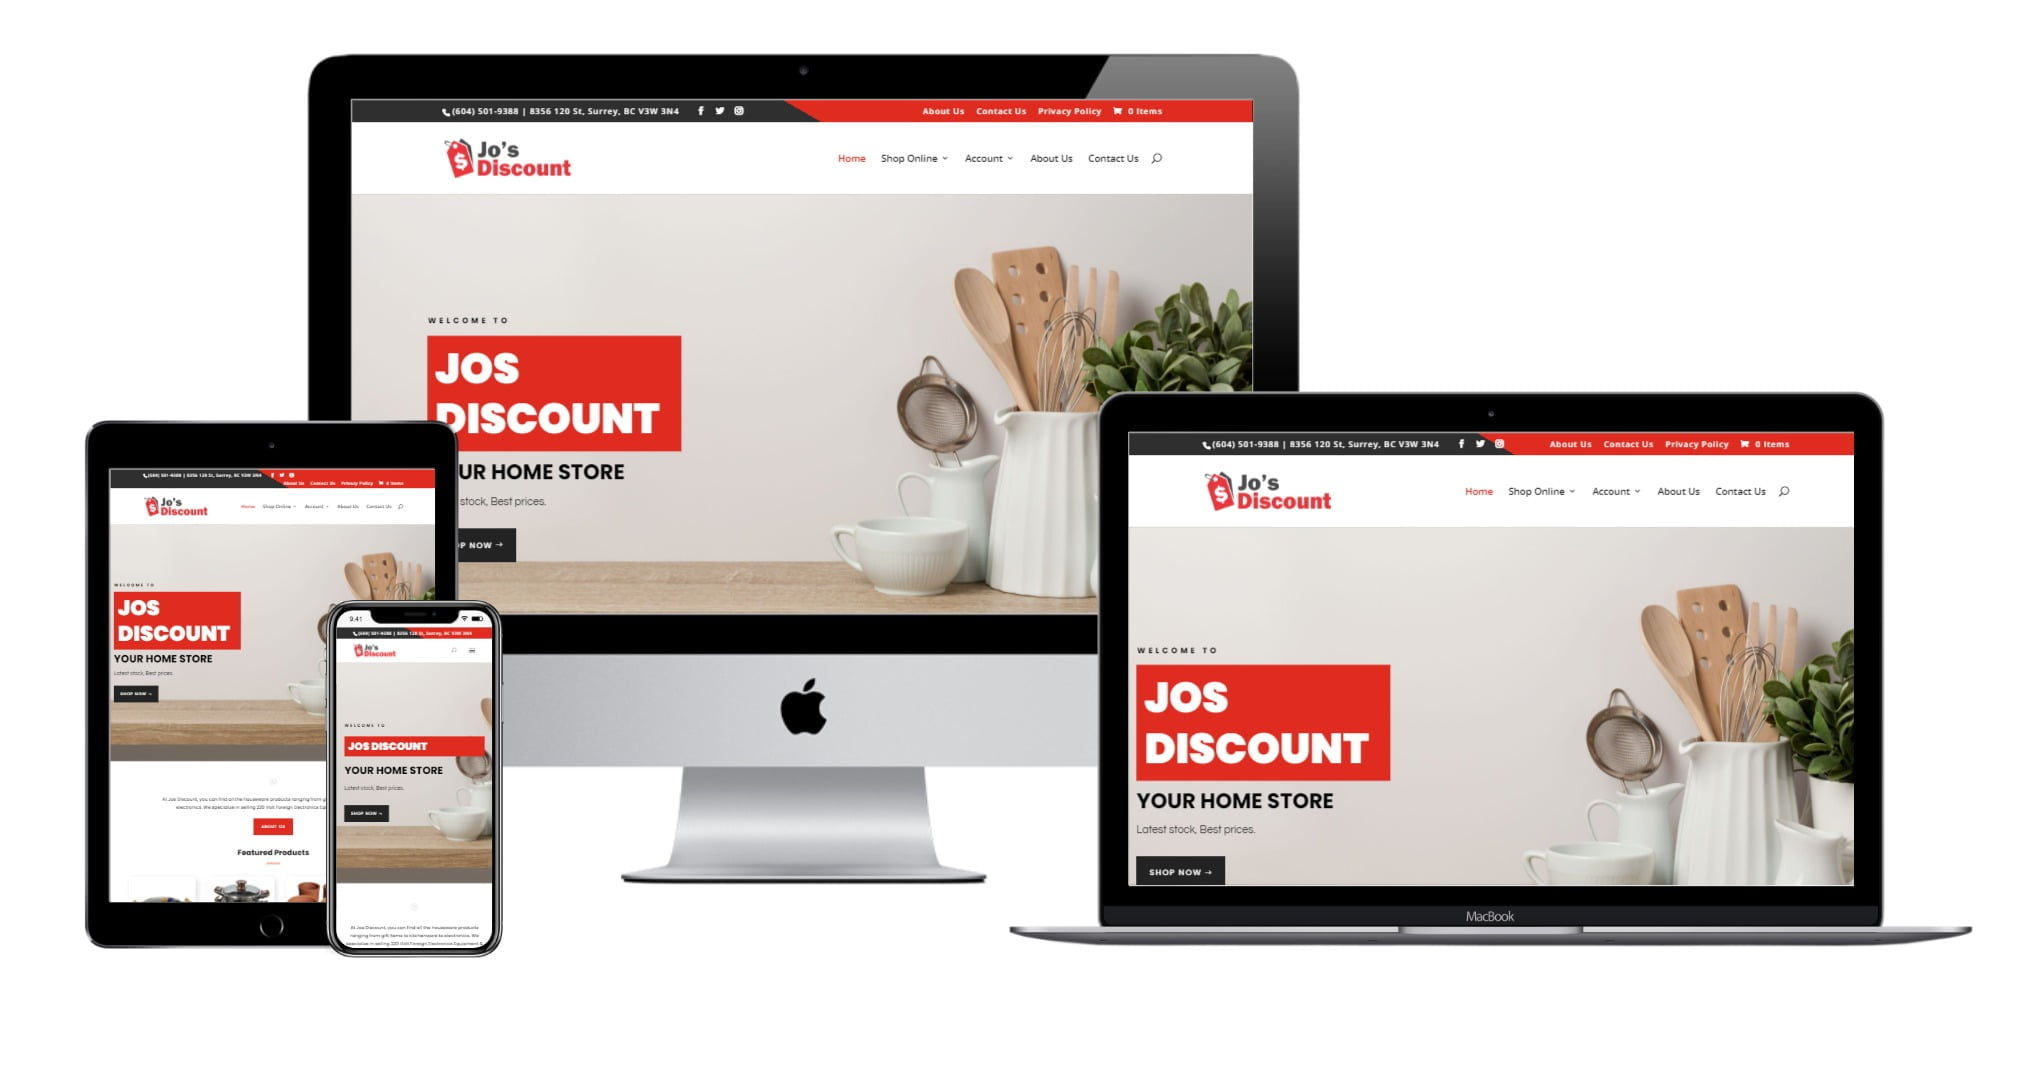 Home and Giftware Store,Ecommerce Website Designing for Jo’s Discount – josdiscount.com